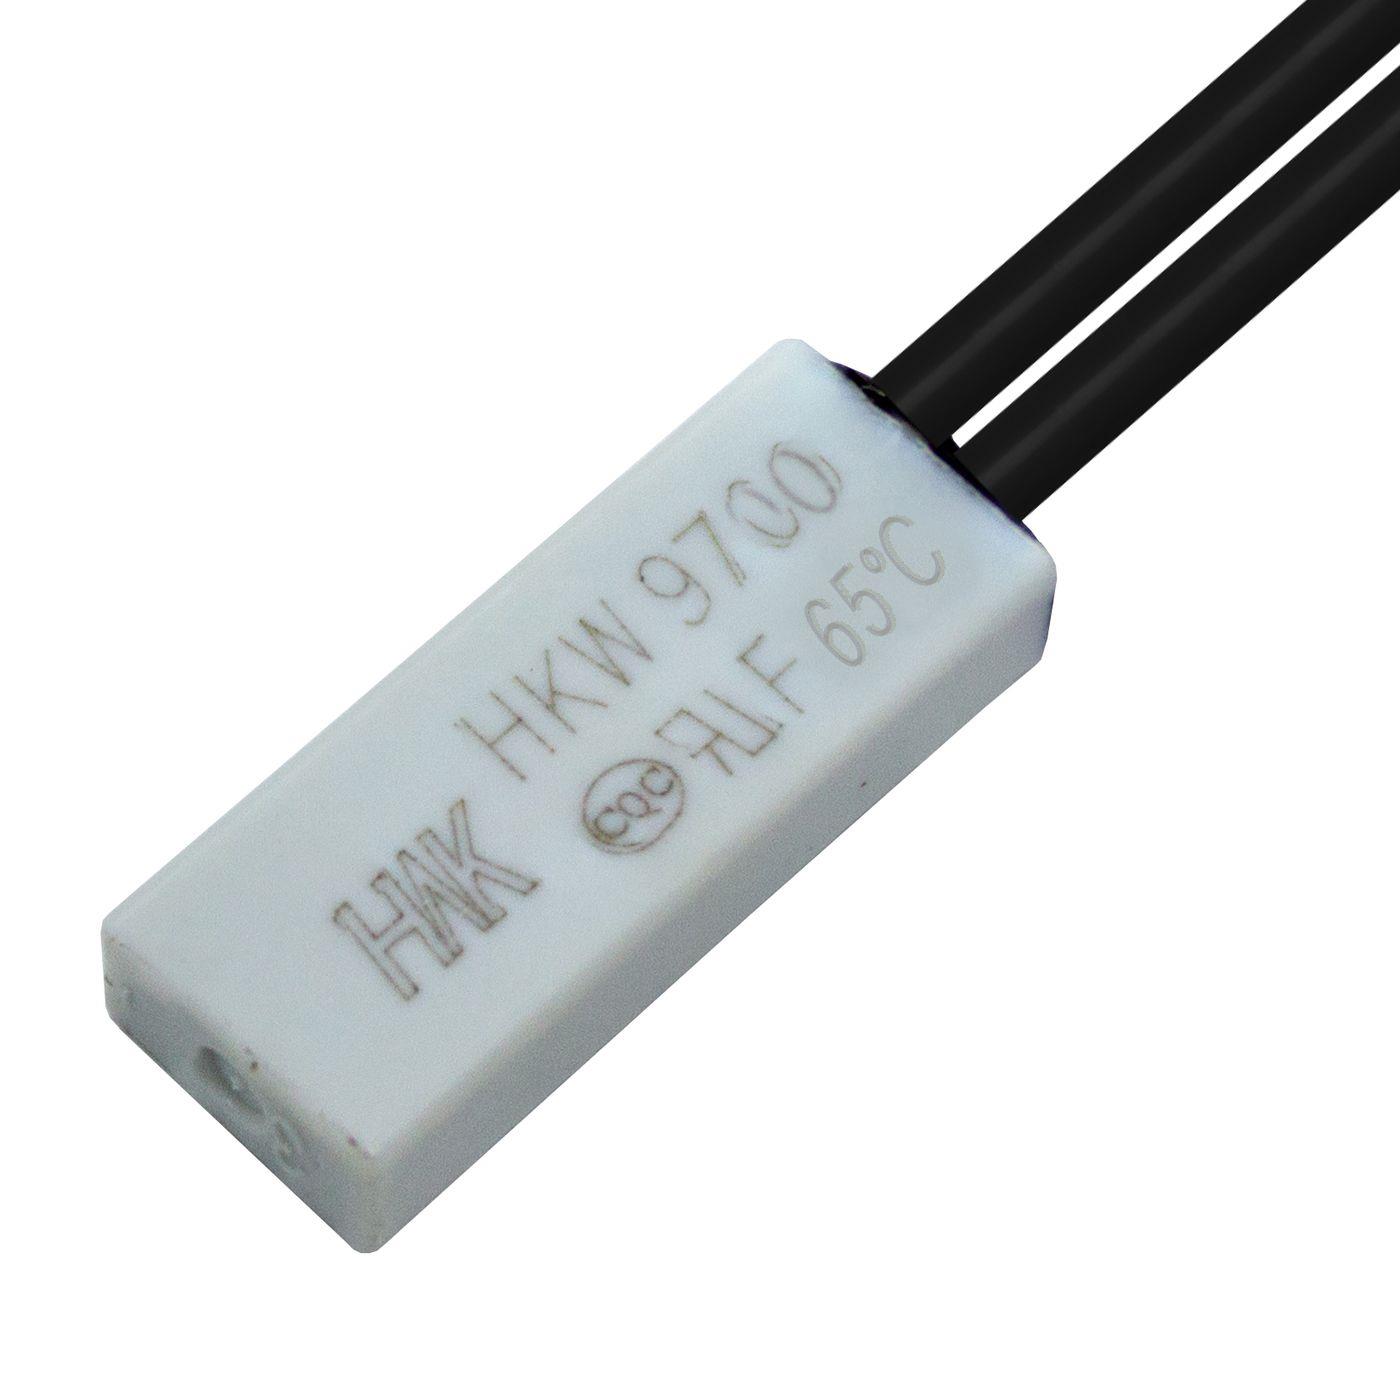 Thermal switch 65°C NC contact 250V 5A Cable Temperature switch thermostat Bimetal Thermal protection